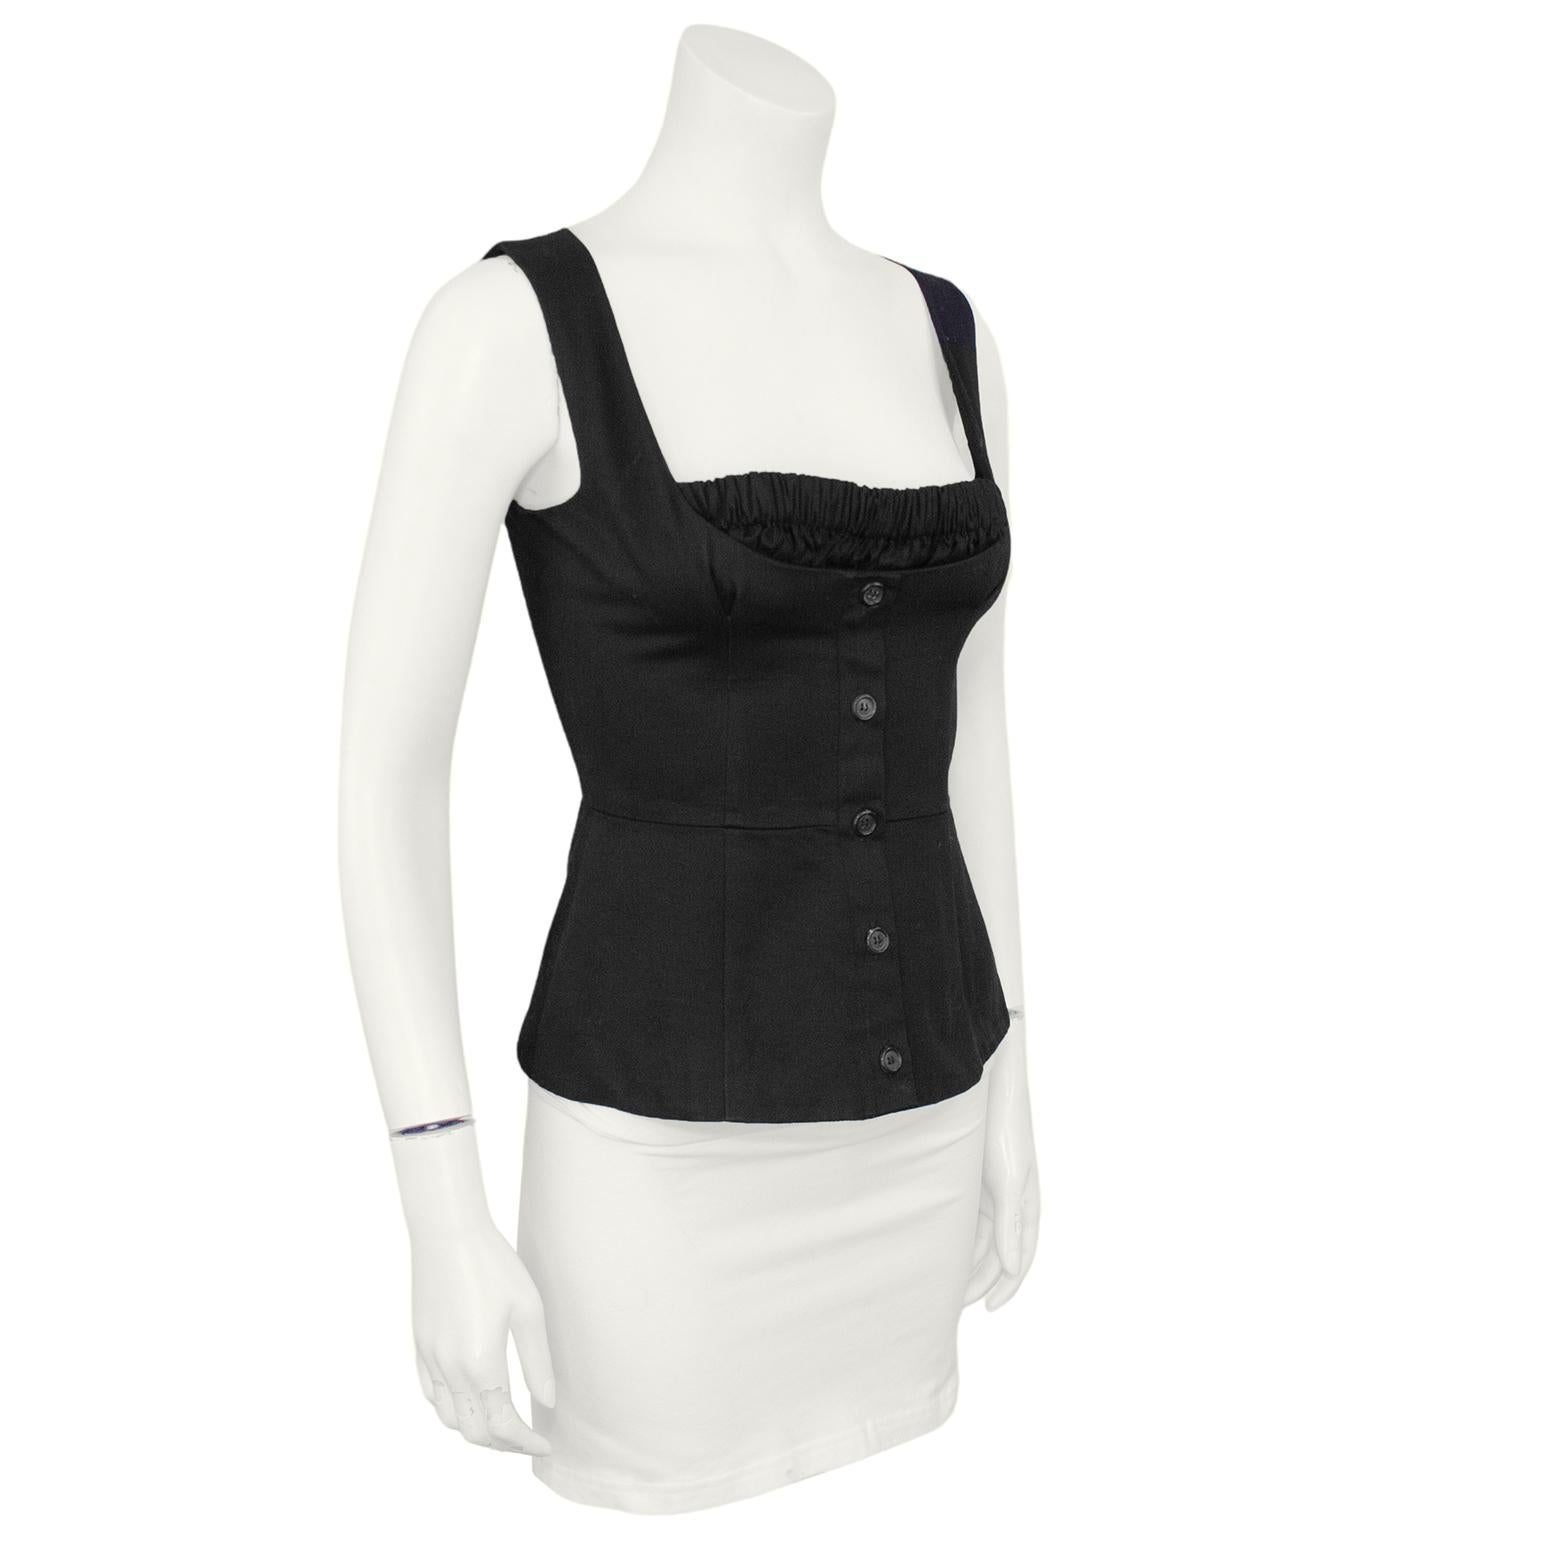 Very chic Prada top from the 1990s. Black cotton twill sleeveless bustier style with elasticated ruching at the bust. Faux buttons down the placket, invisible zipper at left side seam. Excellent vintage condition. Made in Italy. Marked size IT 40,